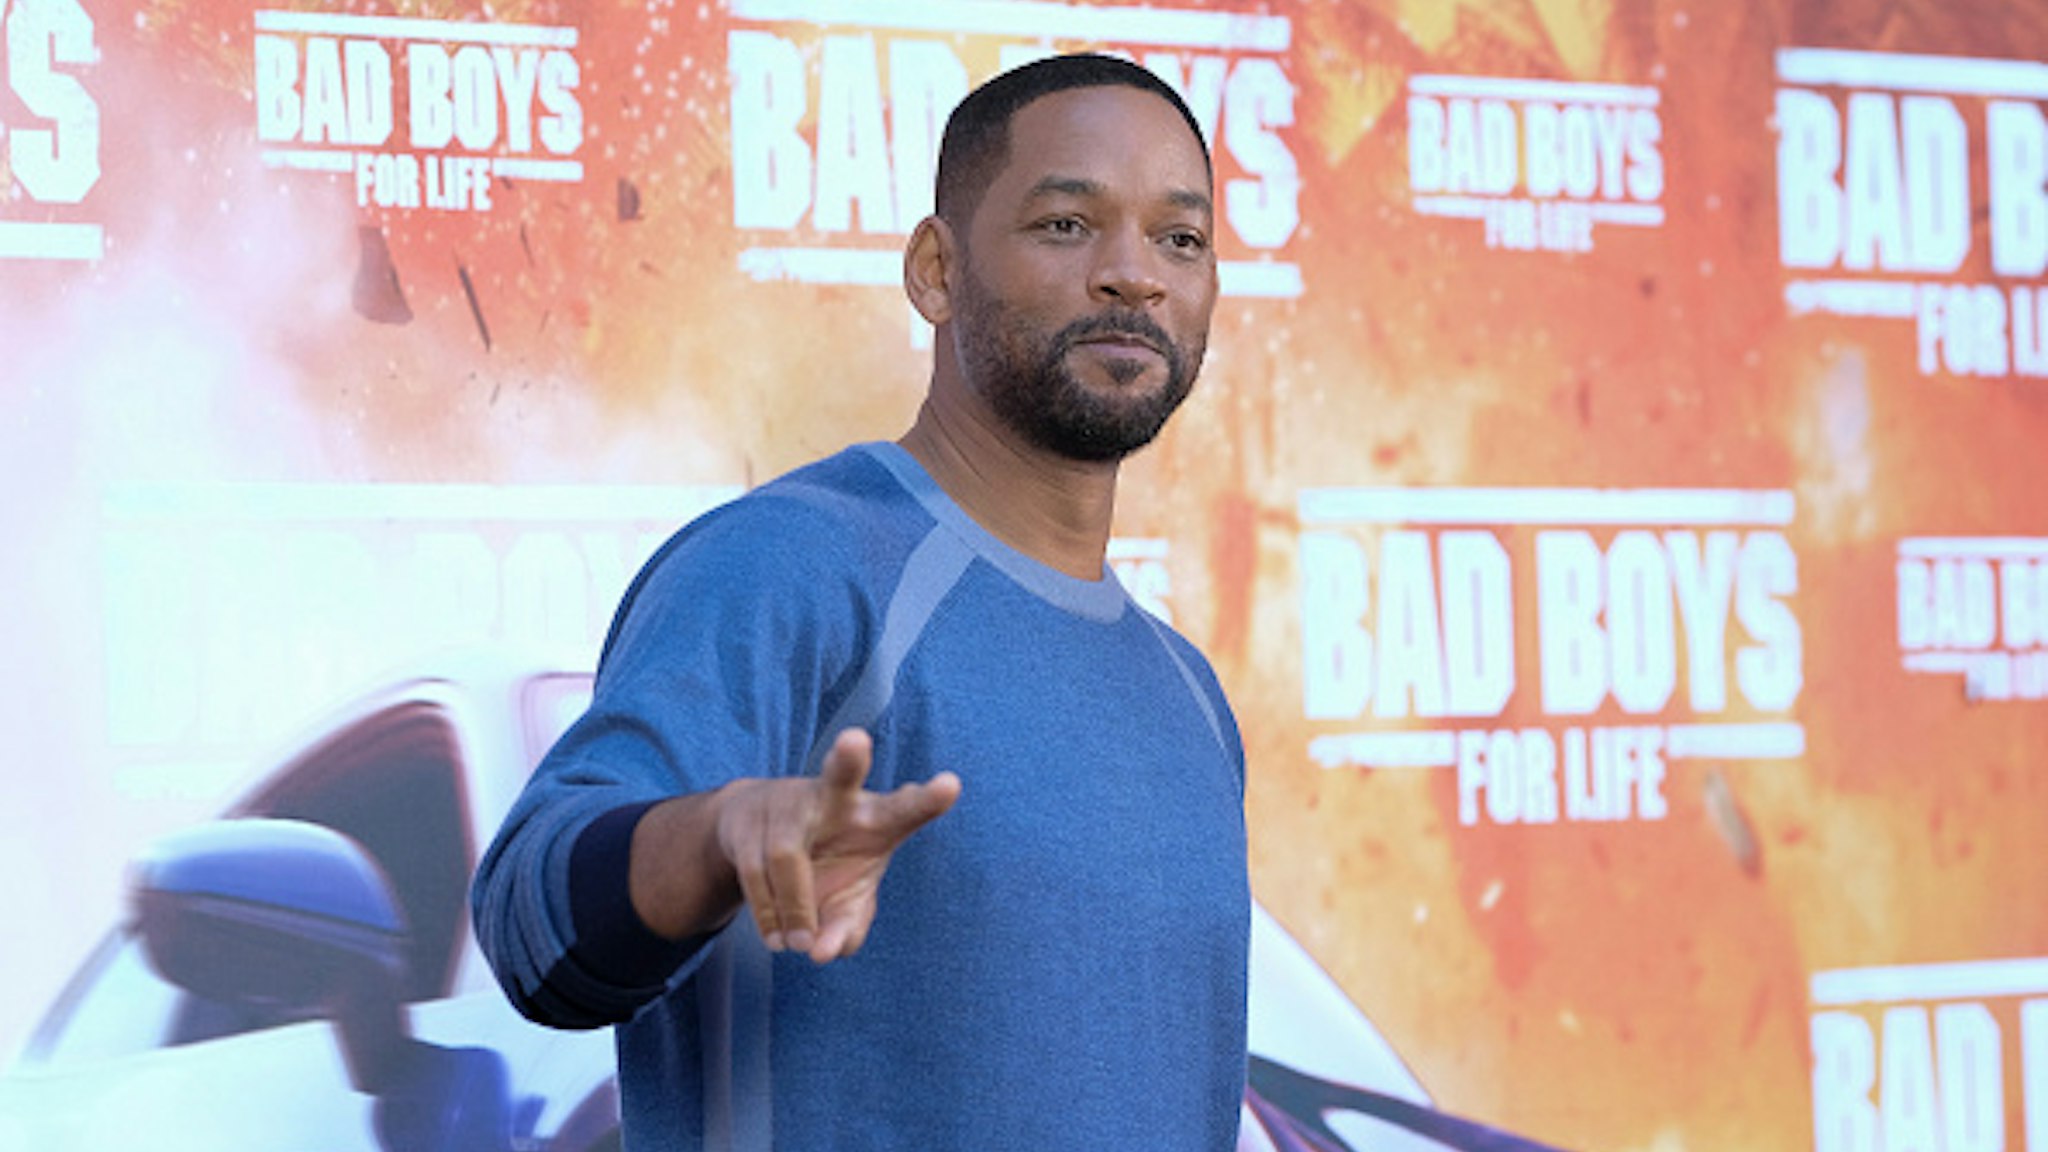 Us actors Martin Will Smith attends 'Bad Boys For Life' photocall at Villa Magna hotel on January 08, 2020 in Madrid, Spain.